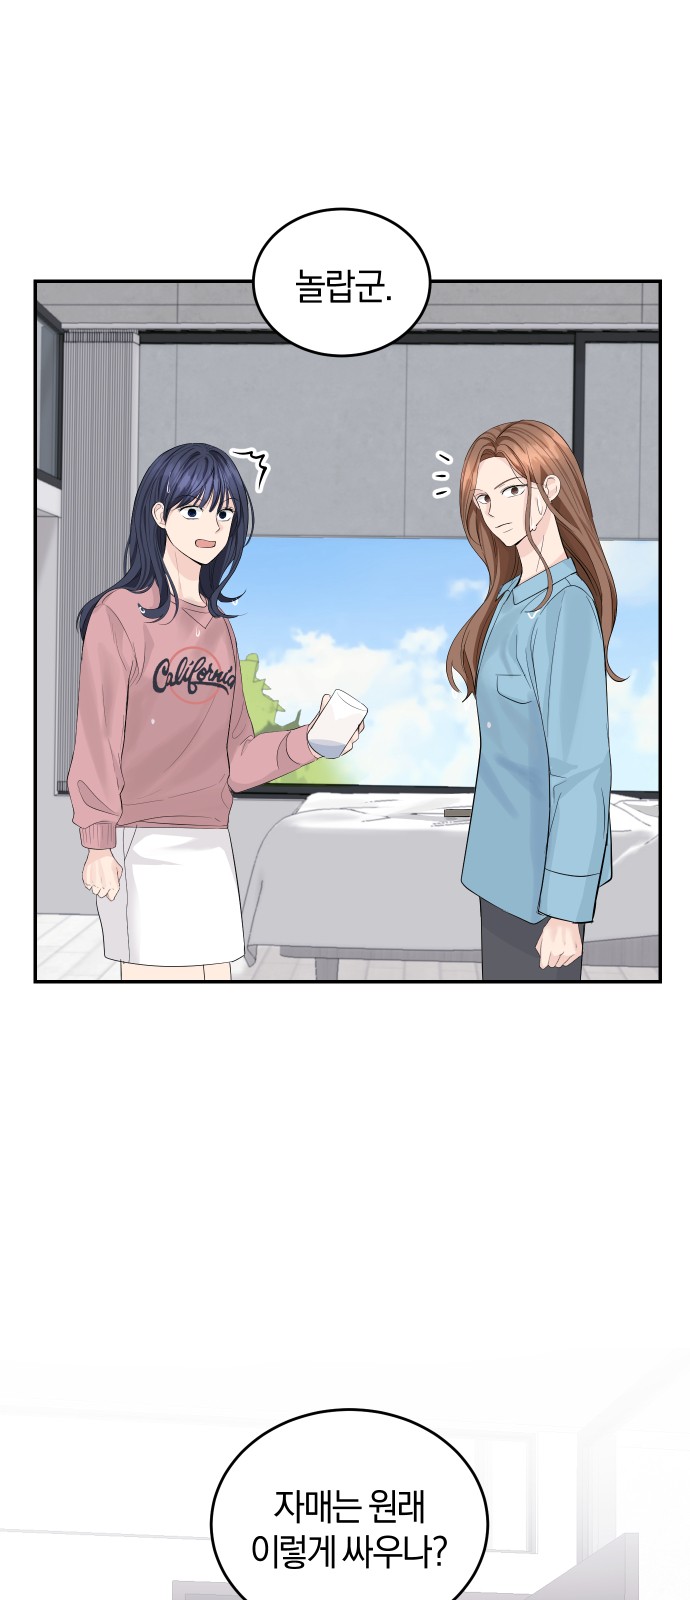 Perfect Marriage Revenge - Chapter 18 - Page 1